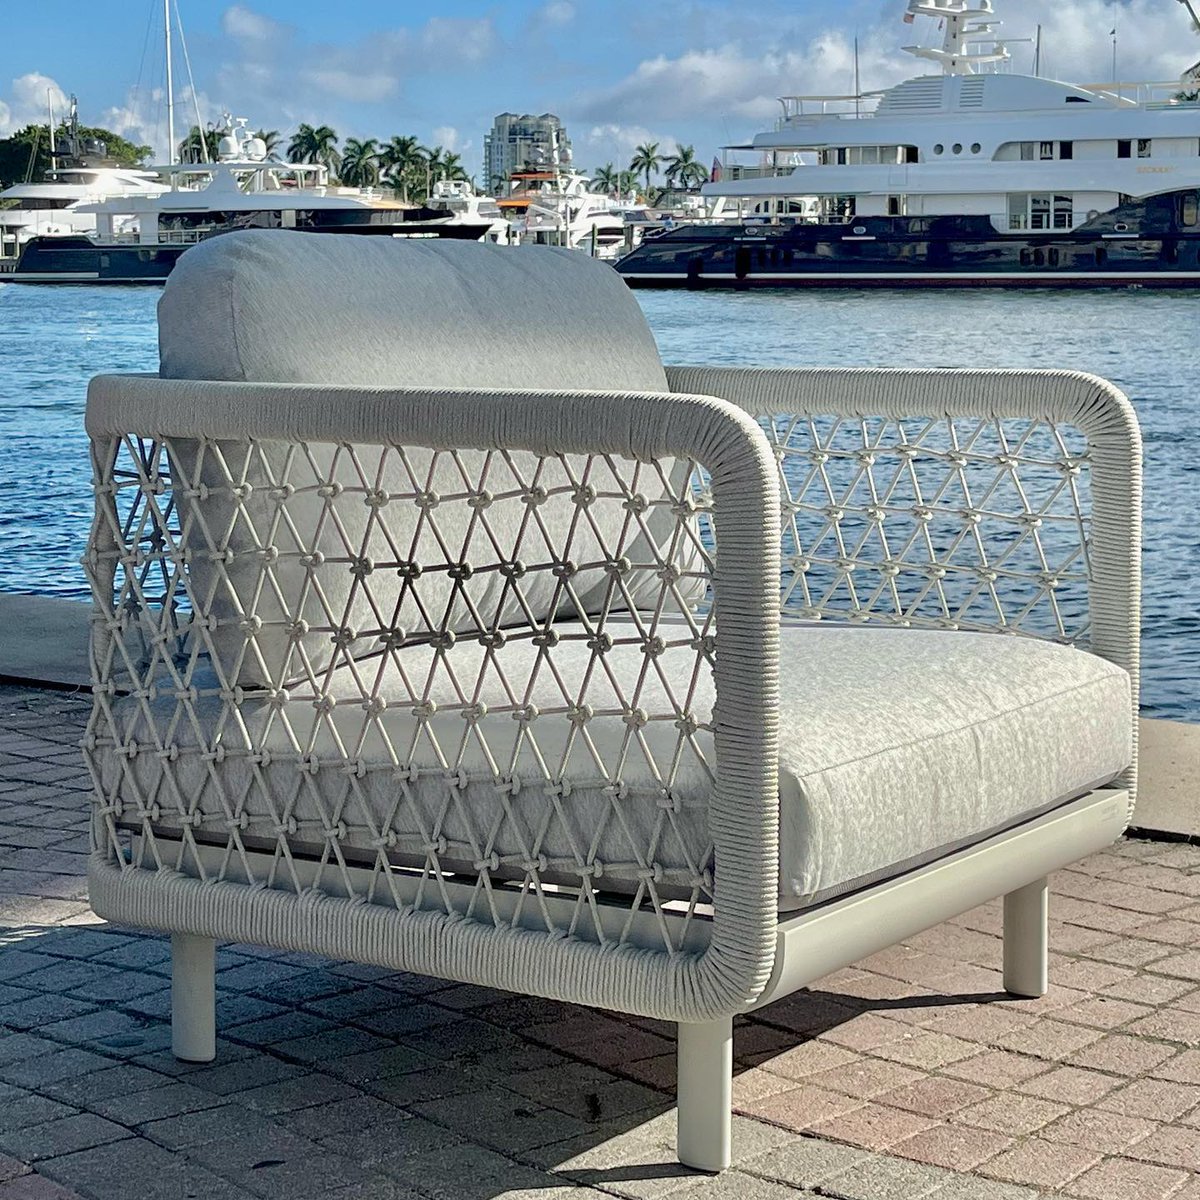 Each piece is woven with care, adding a timeless charm to any space. Elevate your décor with artisanal craftsmanship. #COUTUREJardin #OutdoorFurniture #CLUBcollection  #HandcraftedRopes #RusticElegance